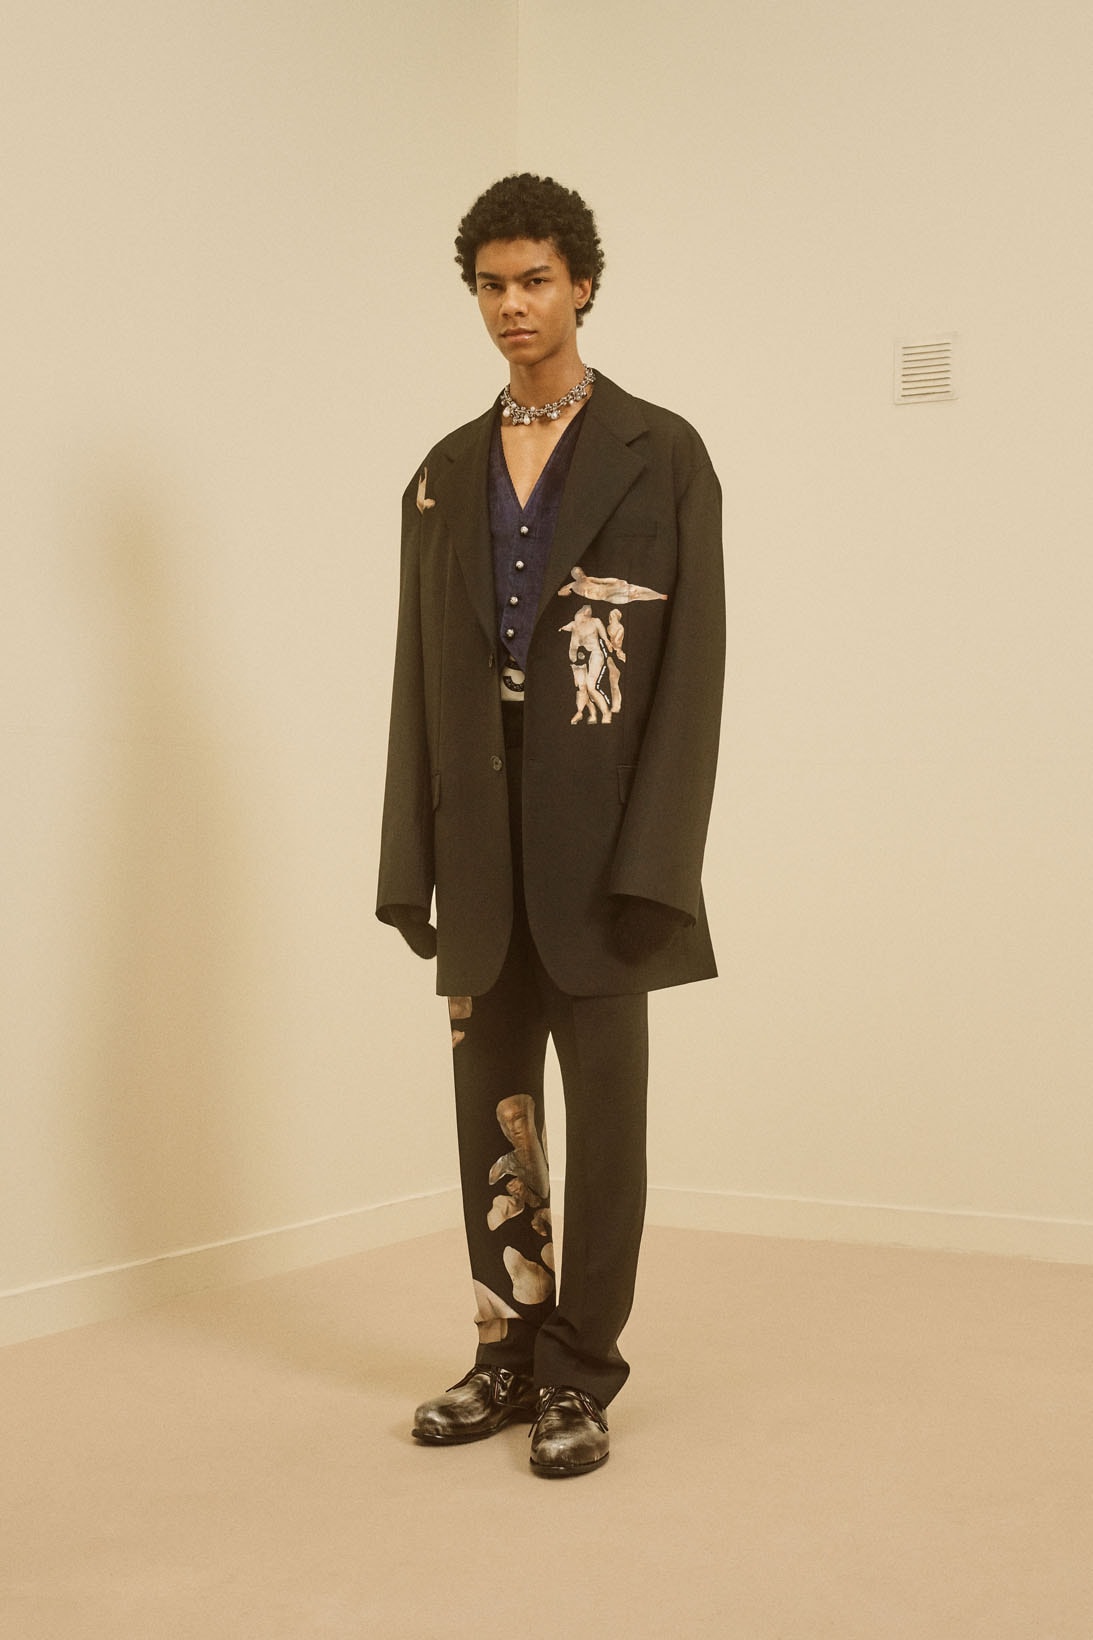 acne studios menswear fall winter 2021 fw21 collection lookbook print graphics suit jacket trousers